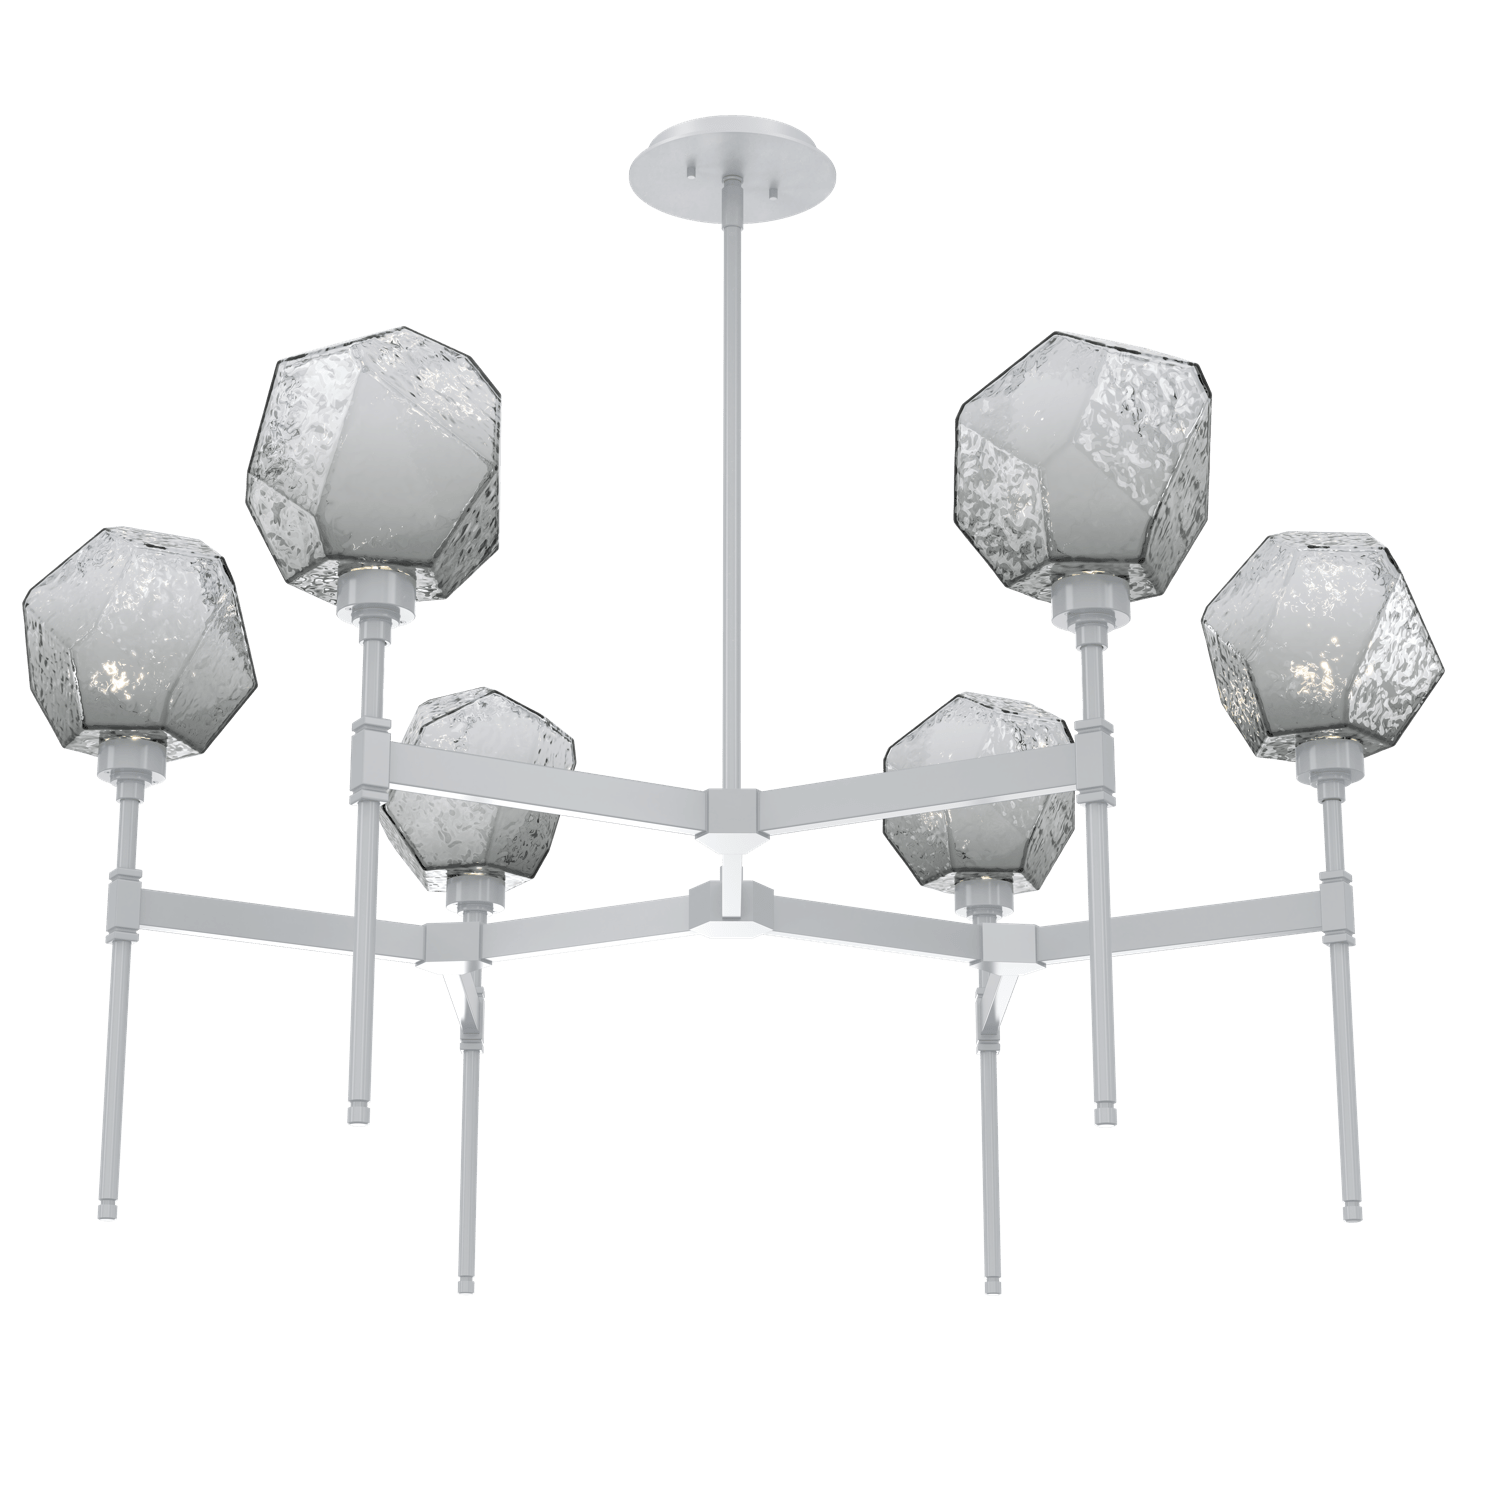 CHB0039-39-CS-S-Hammerton-Studio-Gem-round-belvedere-chandelier-with-classic-silver-finish-and-smoke-blown-glass-shades-and-LED-lamping